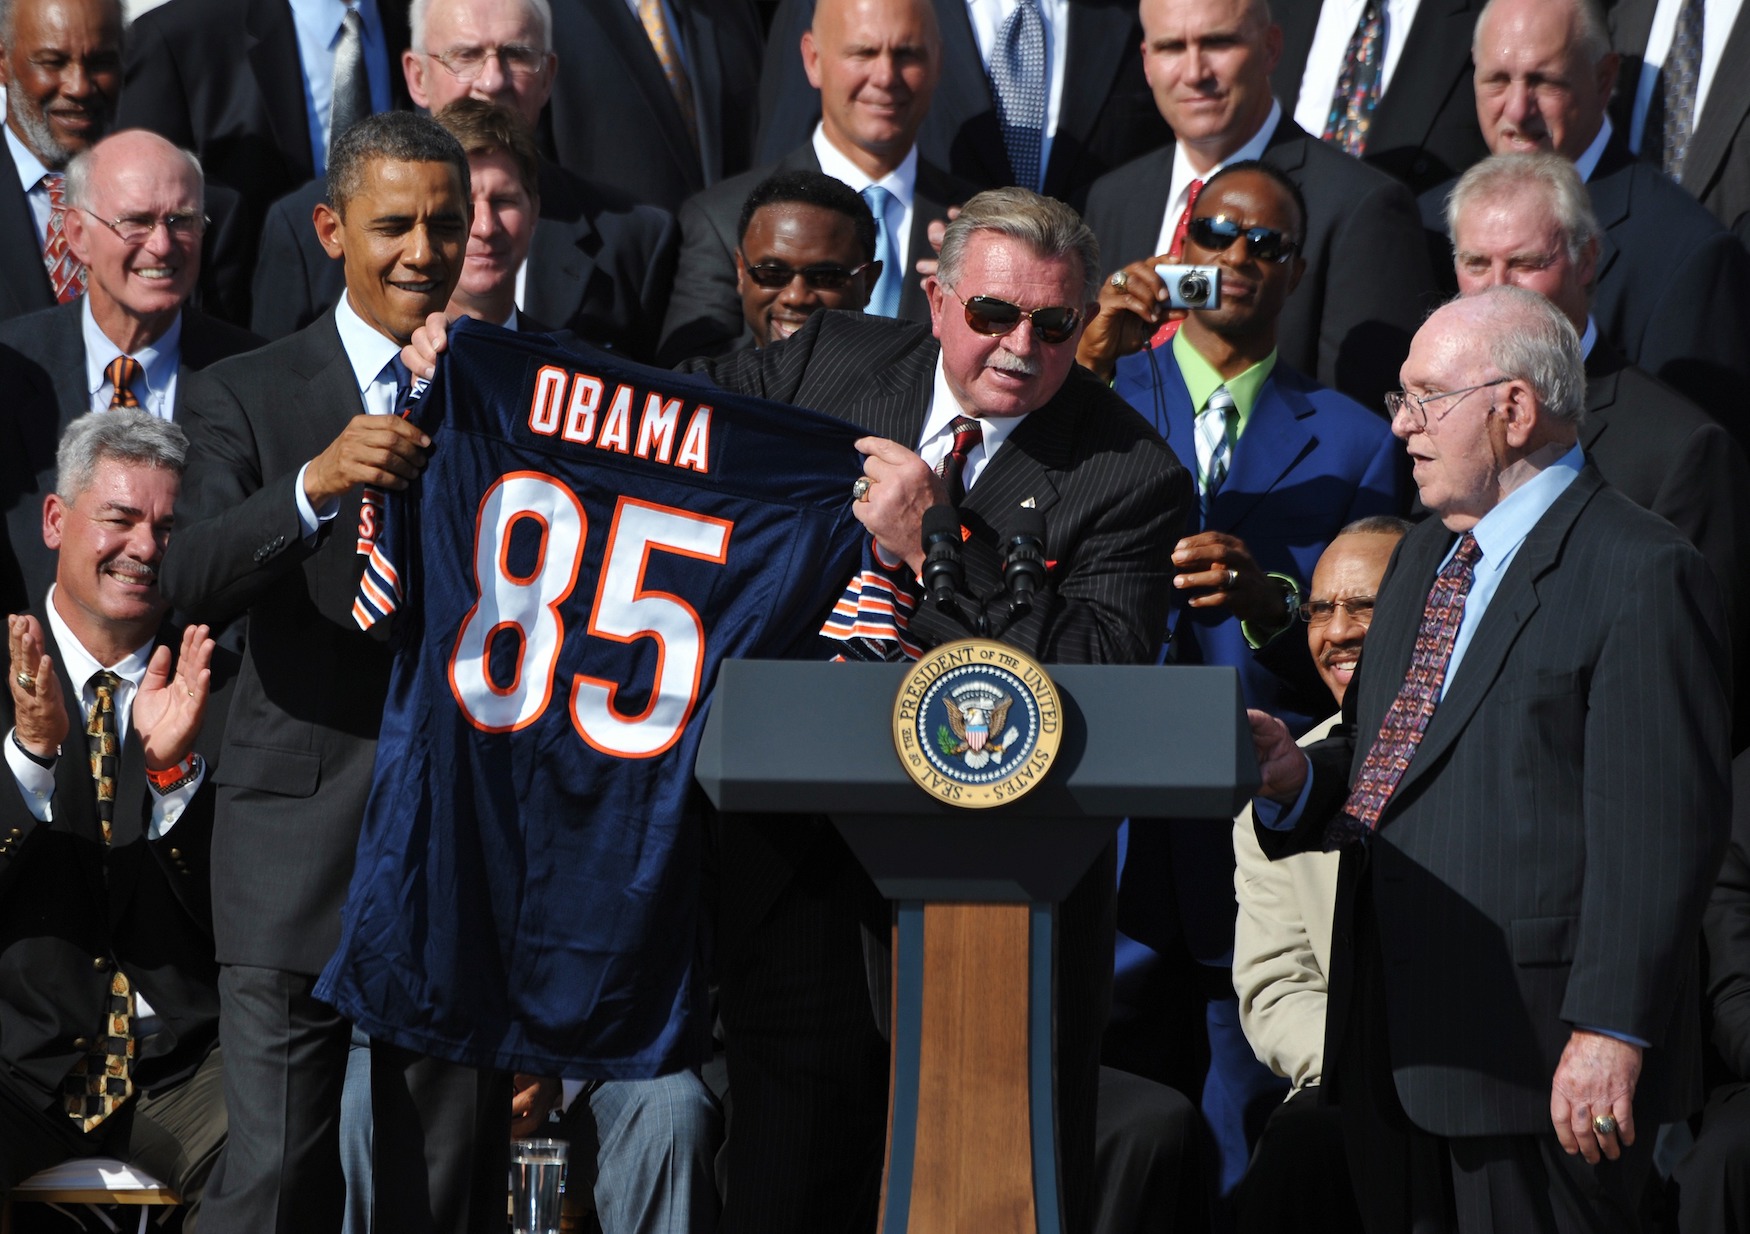 Mike Ditka could have run against Barack Obama in 2004, but decided against it.